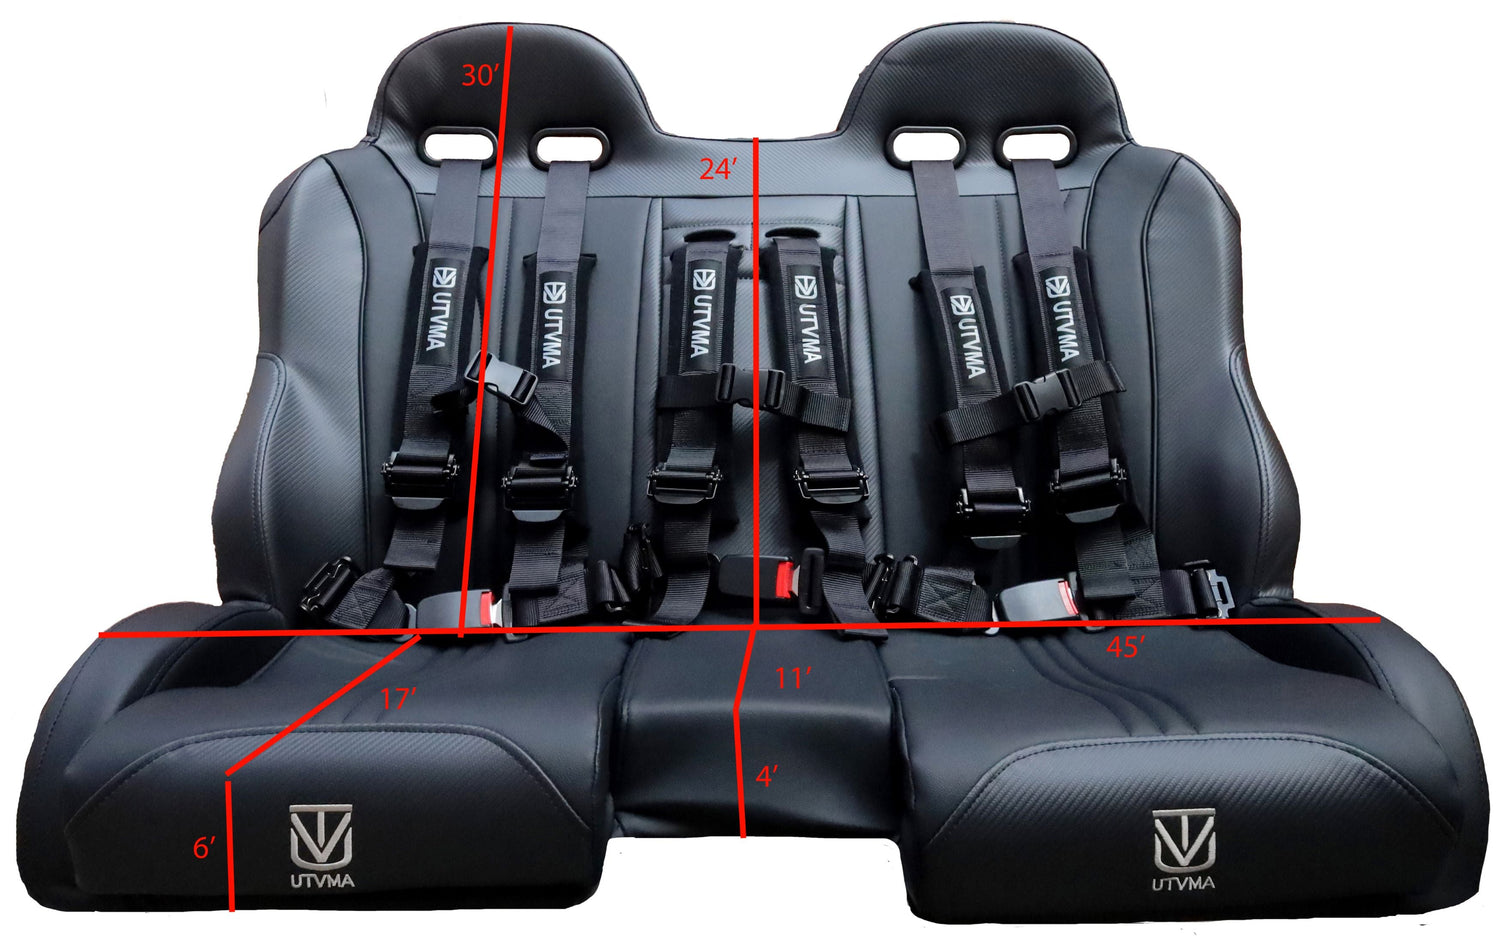 RZR 900 Trail Bench Seat with Harnesses (over the console)